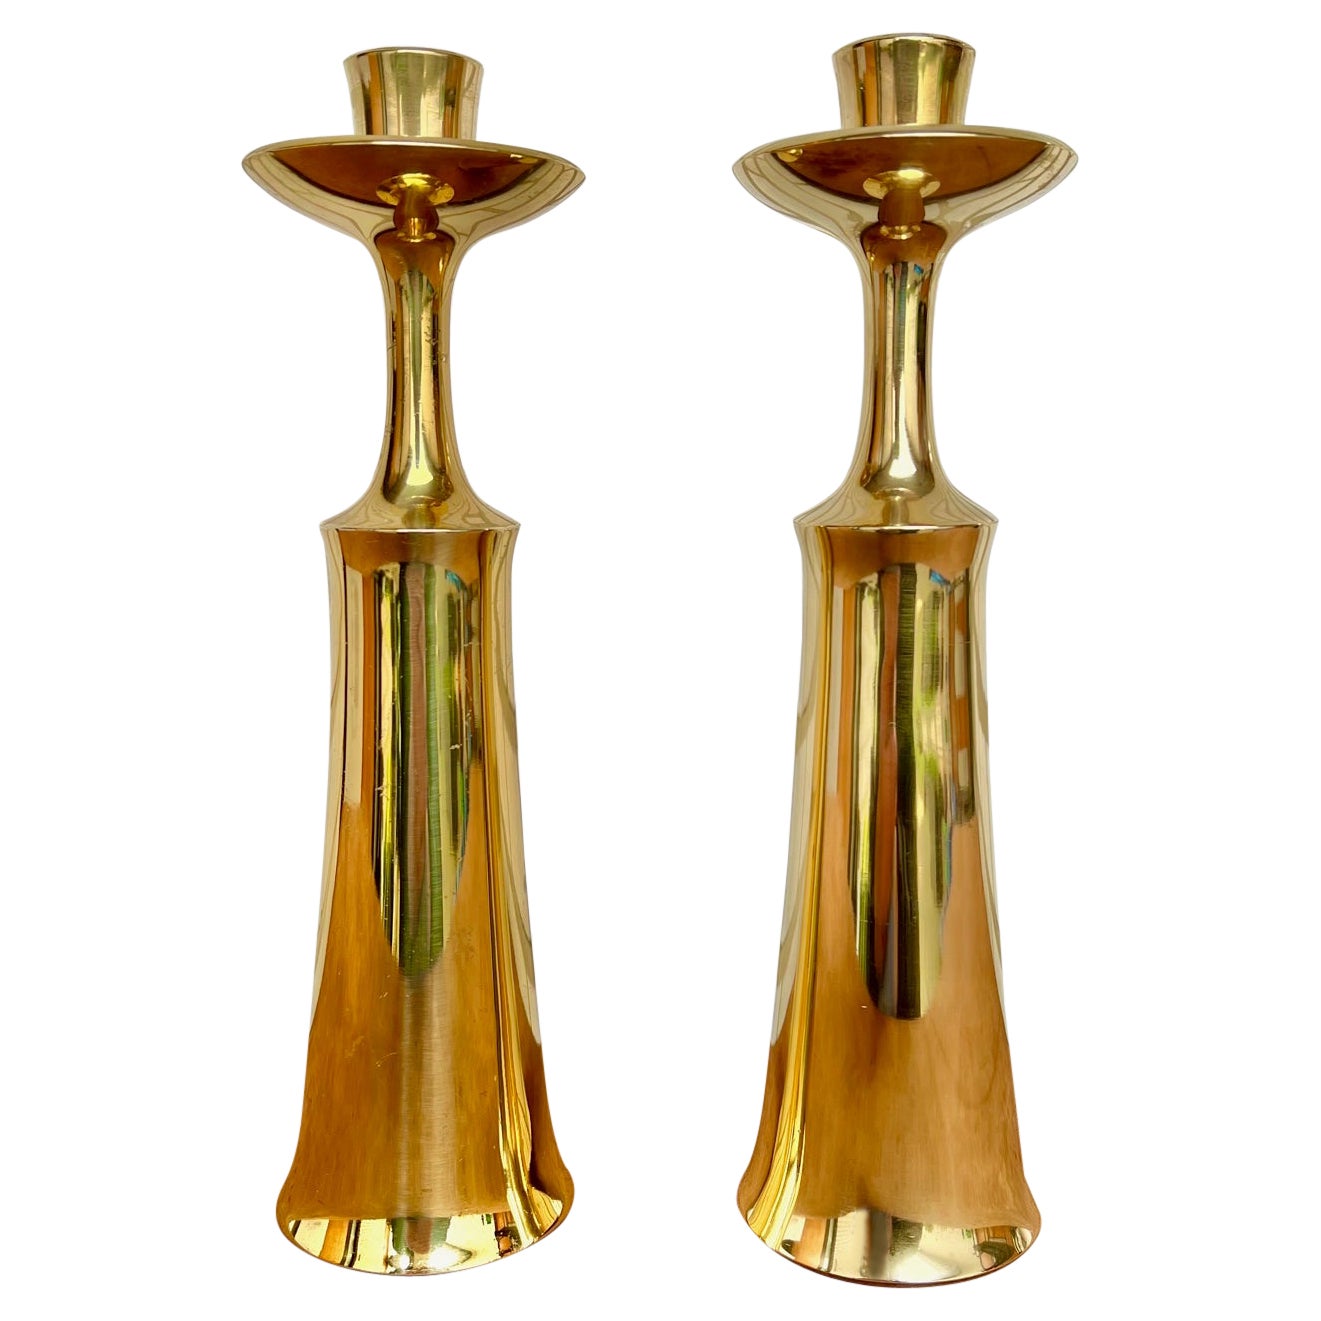 Candle Sticks in Brass by Jens Harald Quistgaard for Dansk Designs, 1950s For Sale